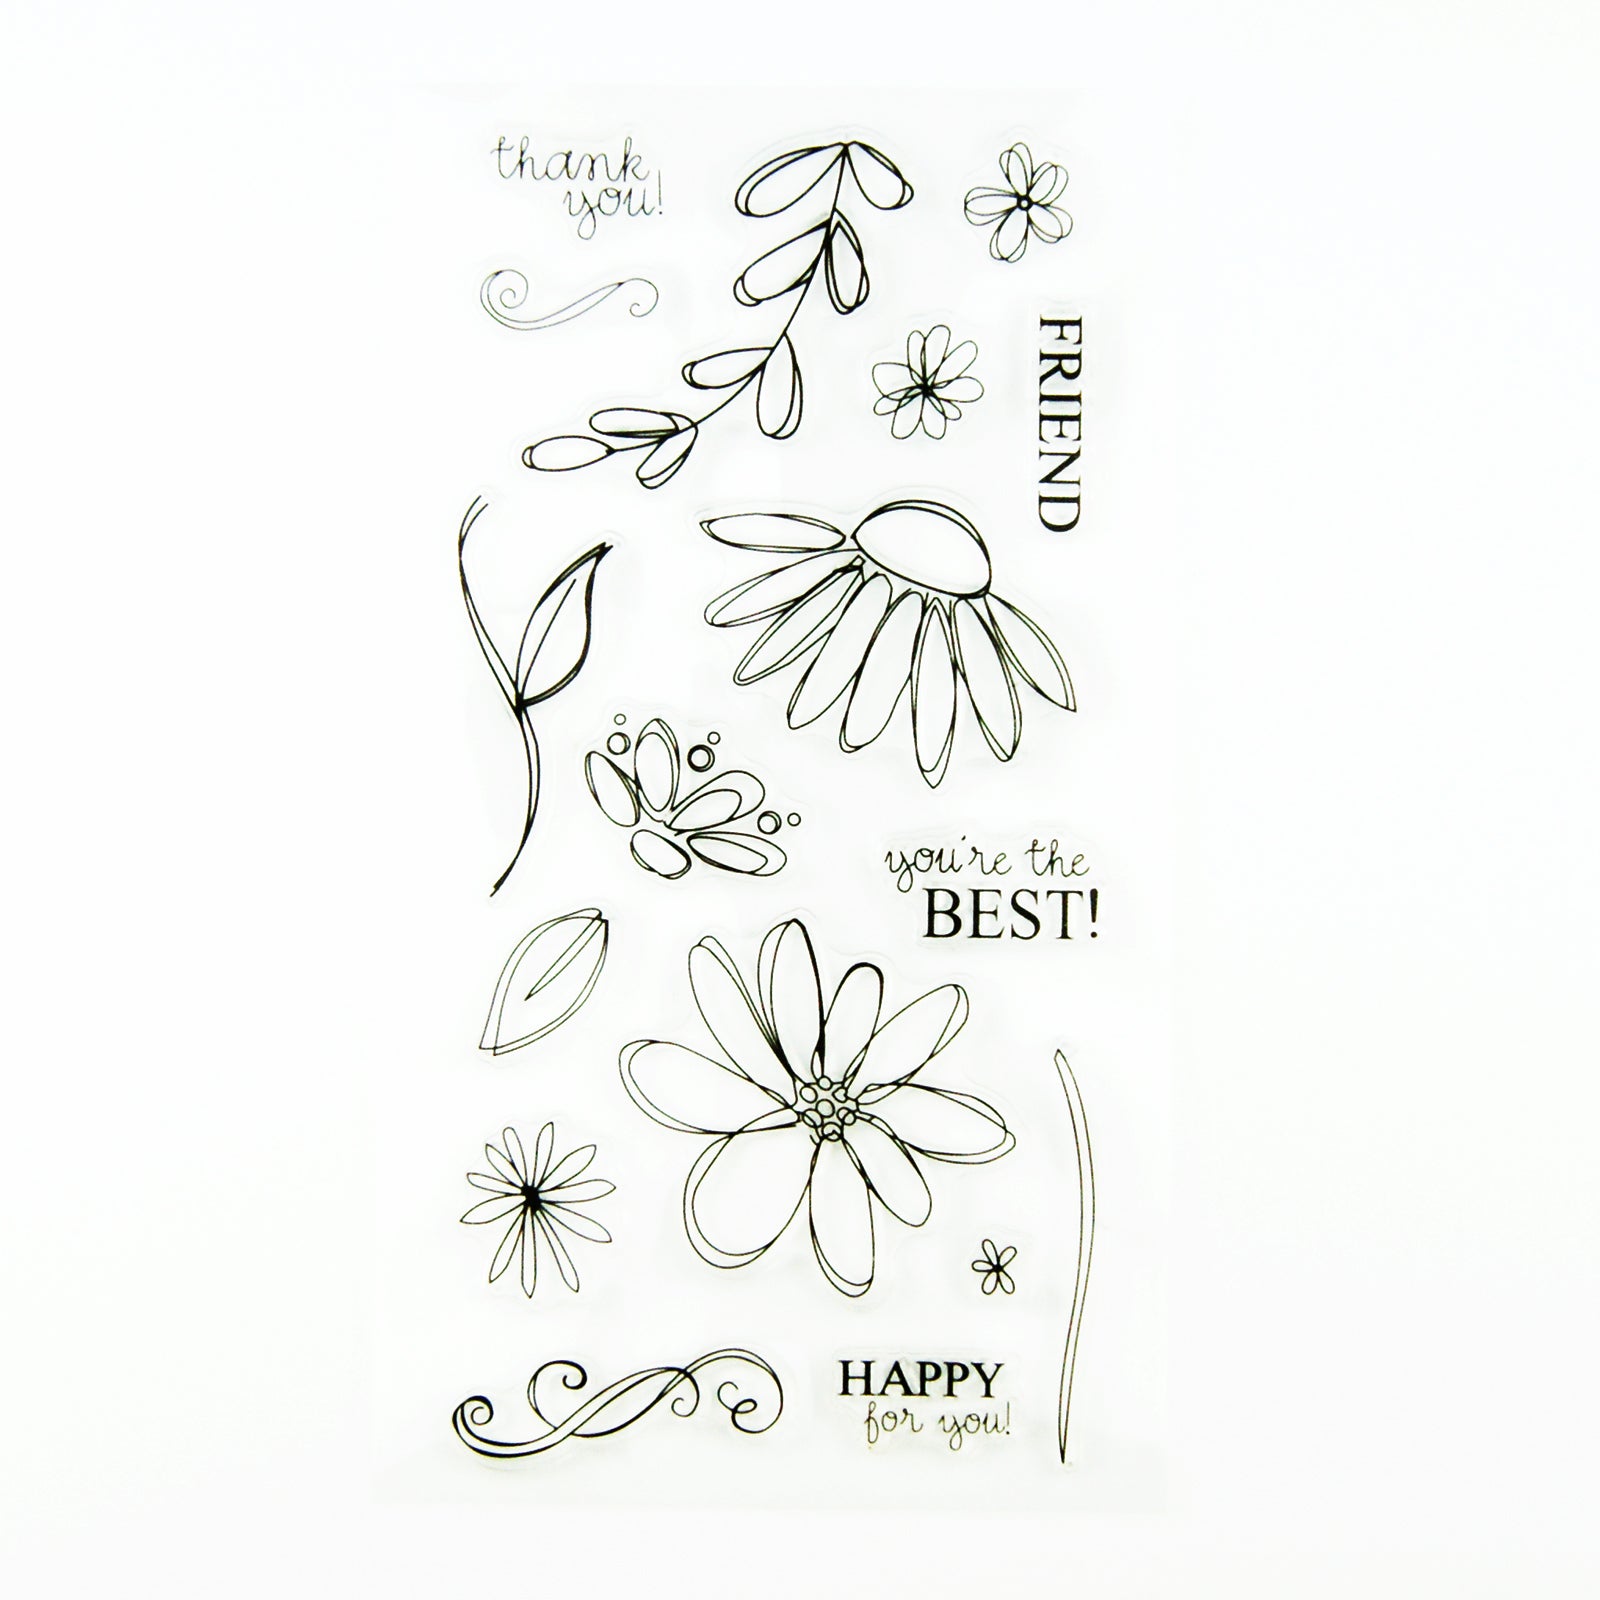 Clear stamp set flowers and sentiments for scrapbooking